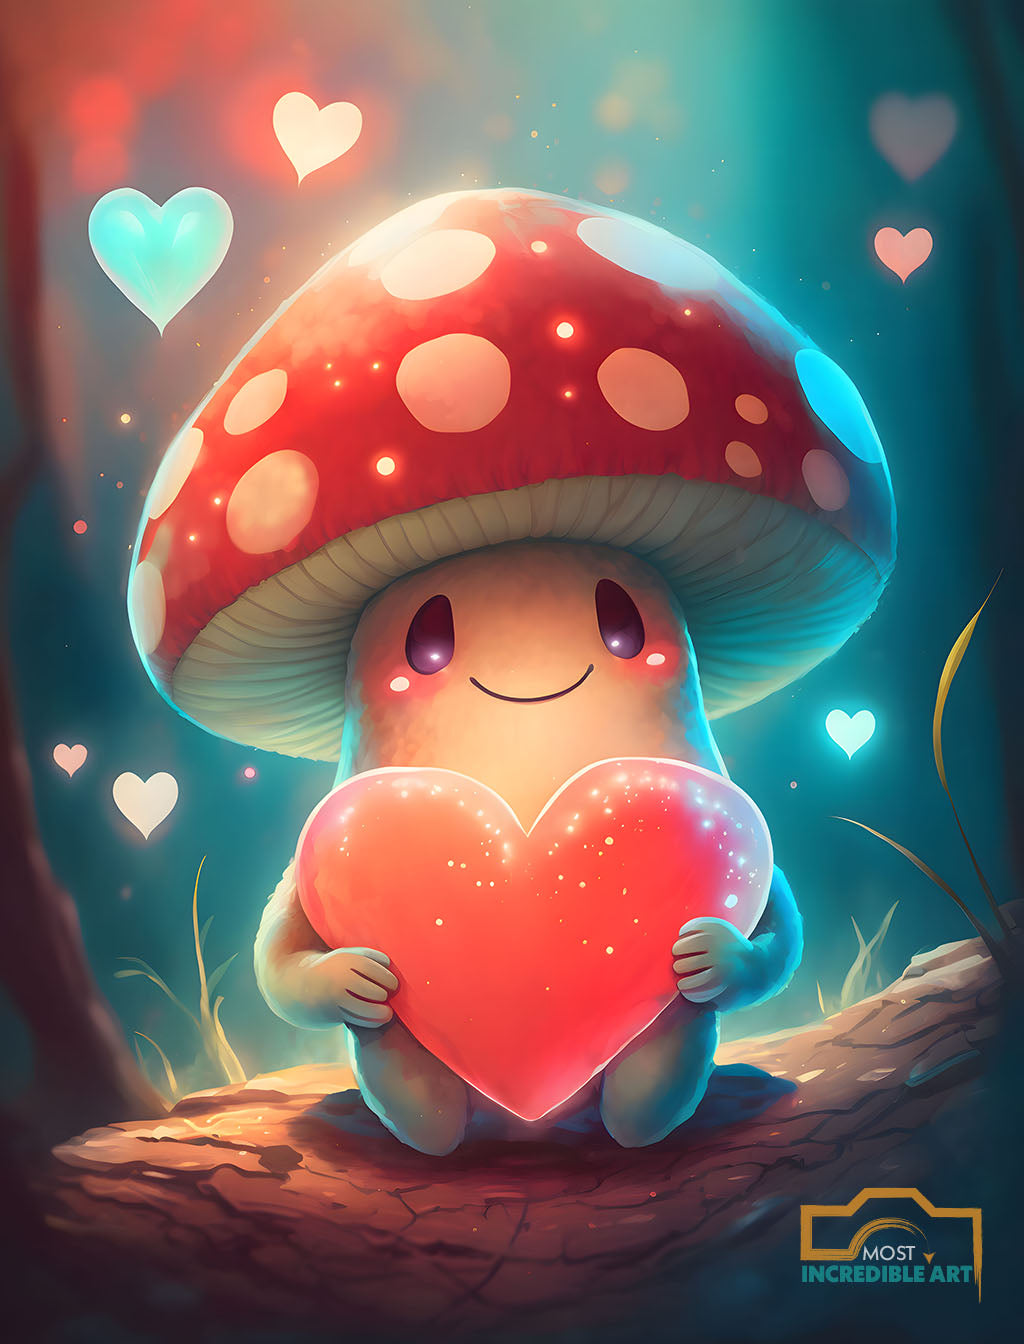 Anthropomorphic mushroom smiling and holding a heart - Wall Art